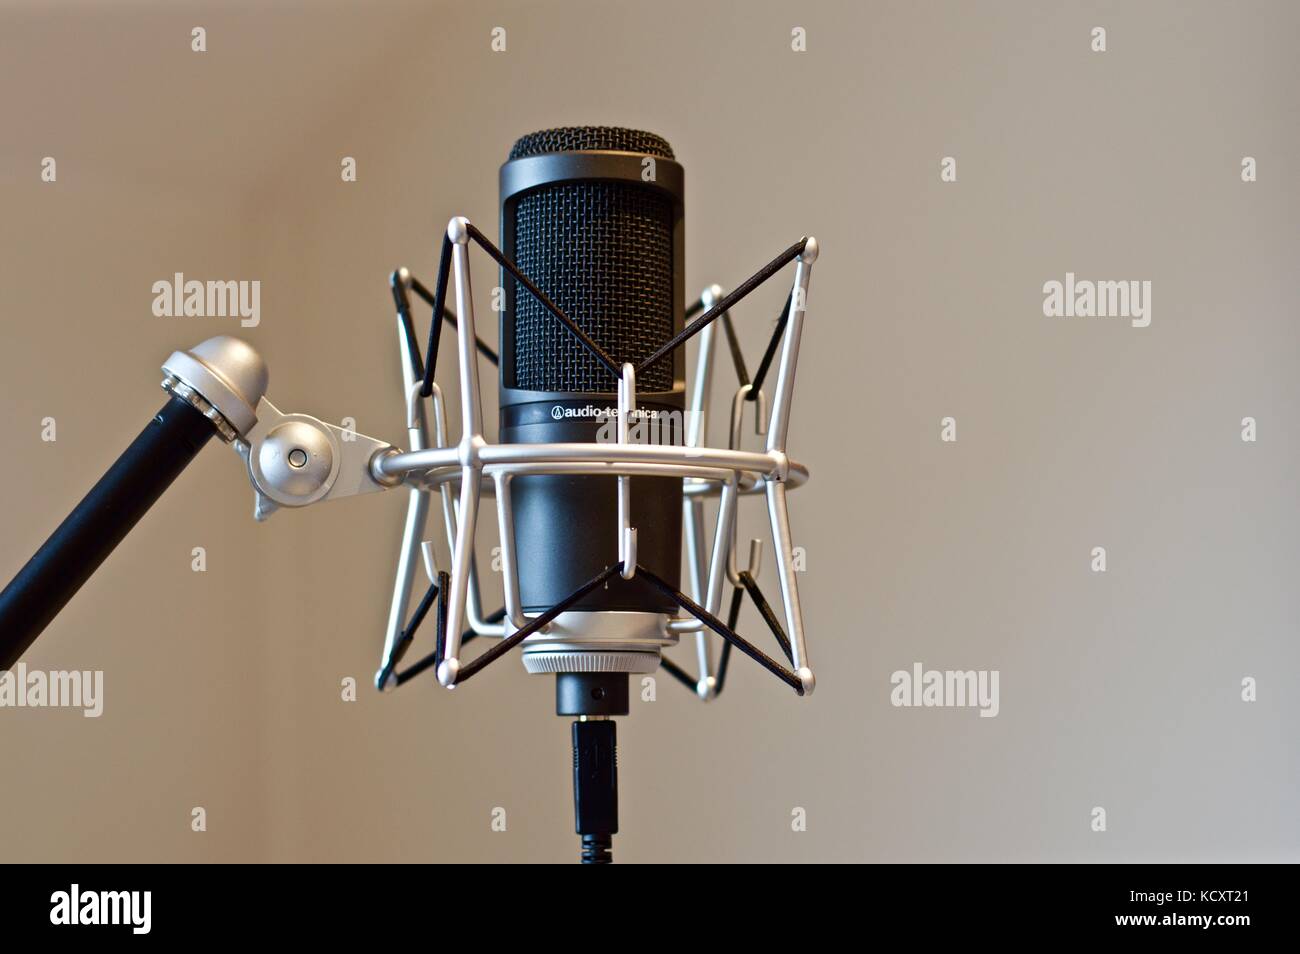 Home studio microphone on stand with shock mount Stock Photo